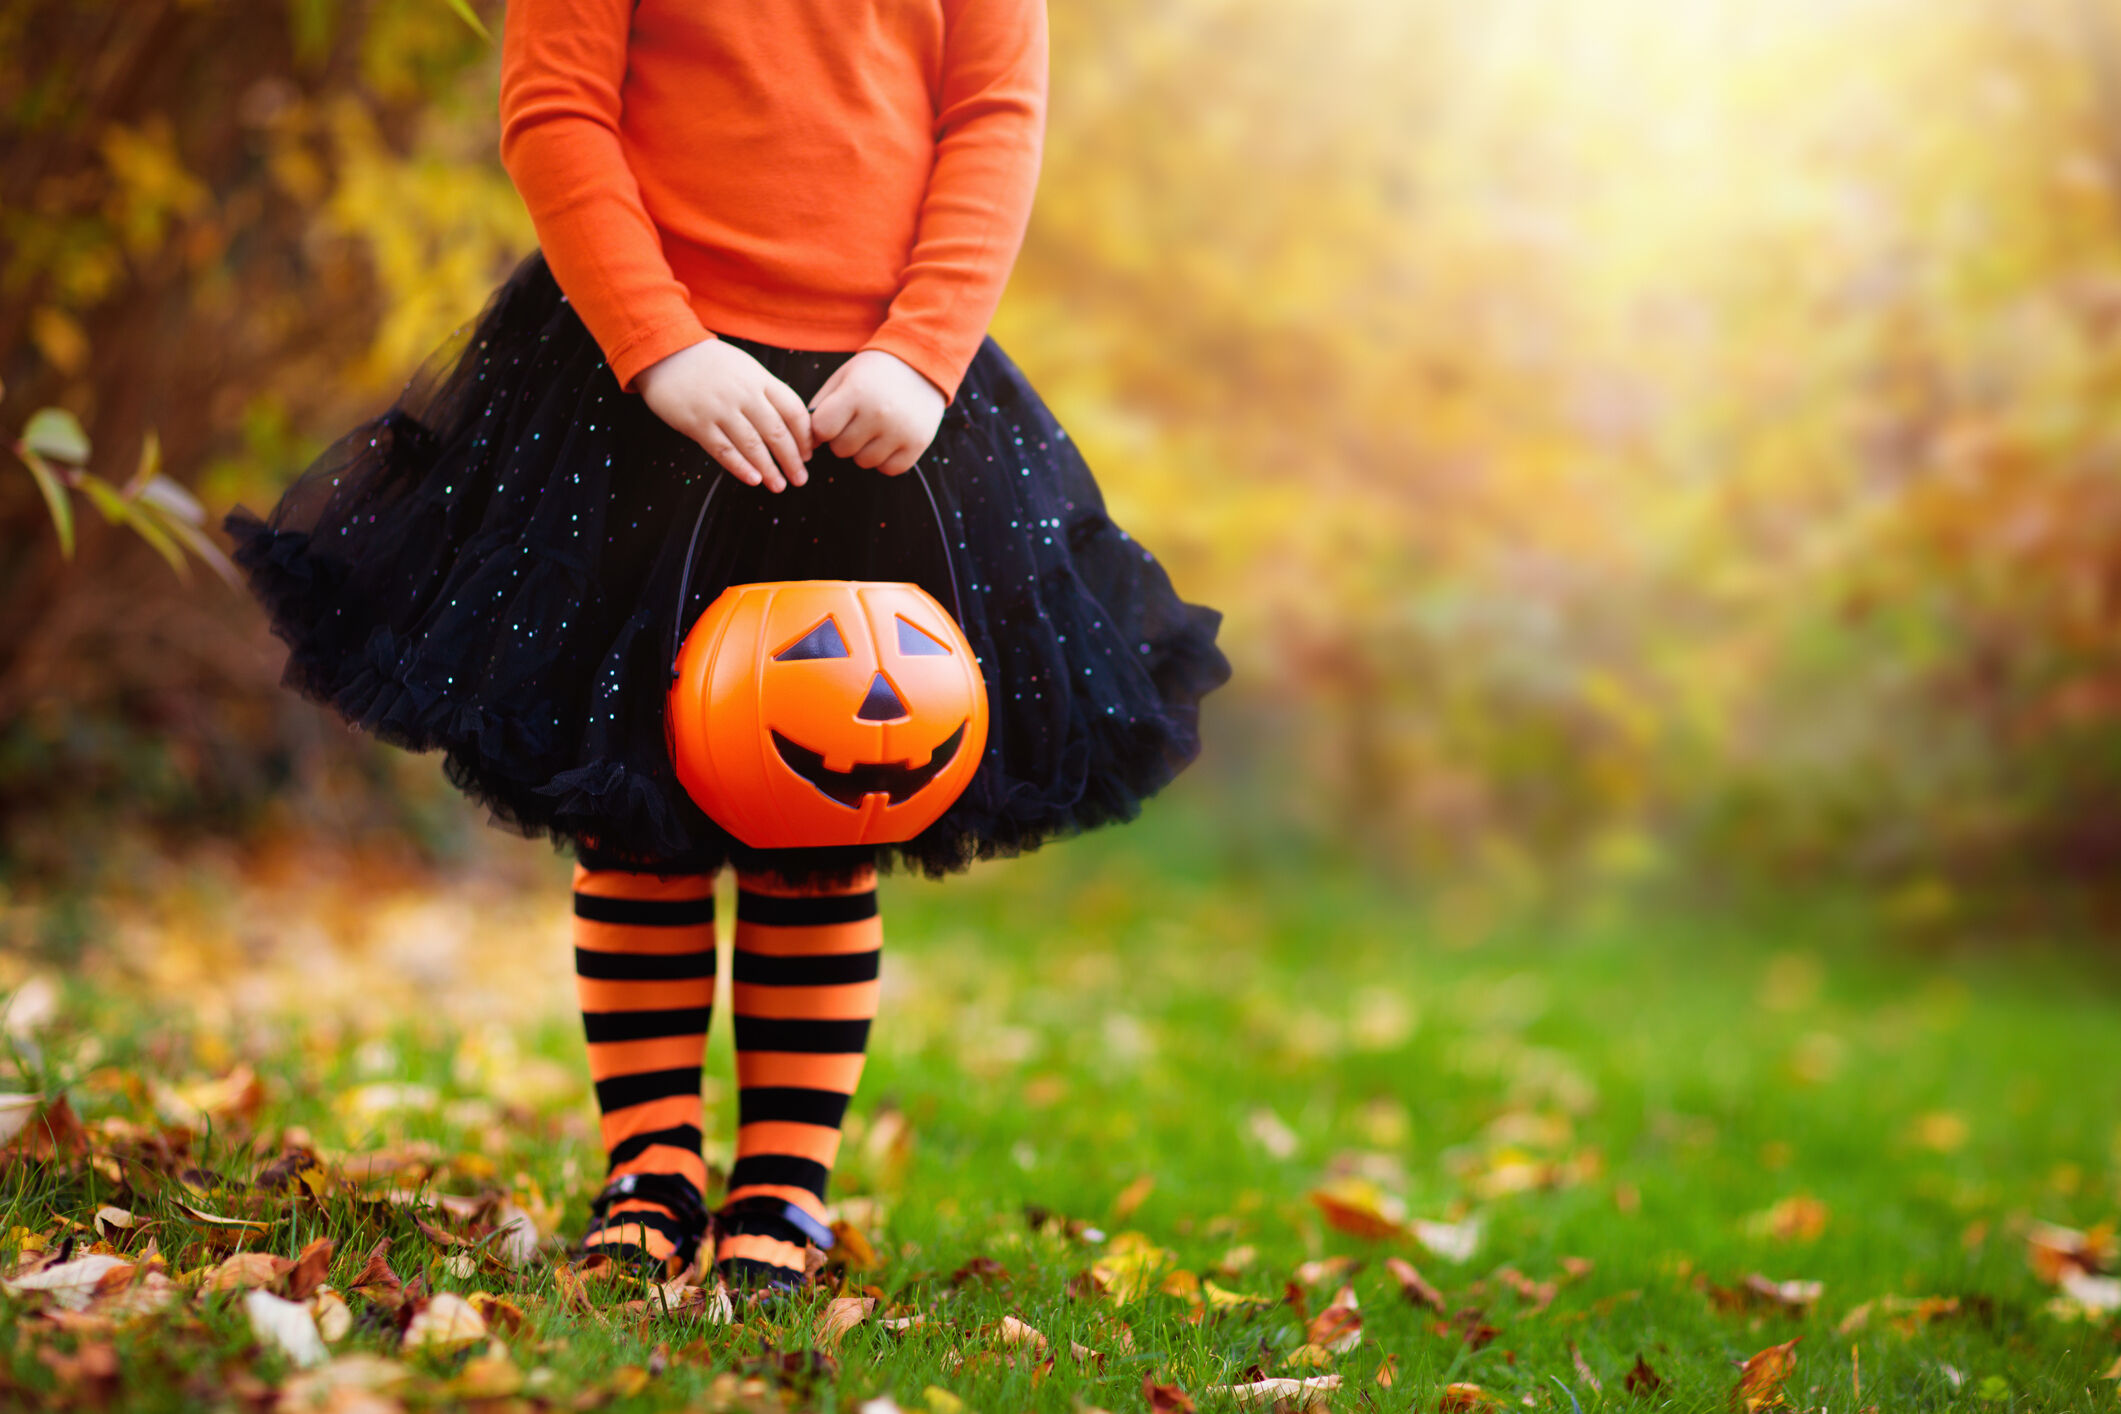 Bundle up trick-or-treaters: Halloween trending to be chilly in DC area